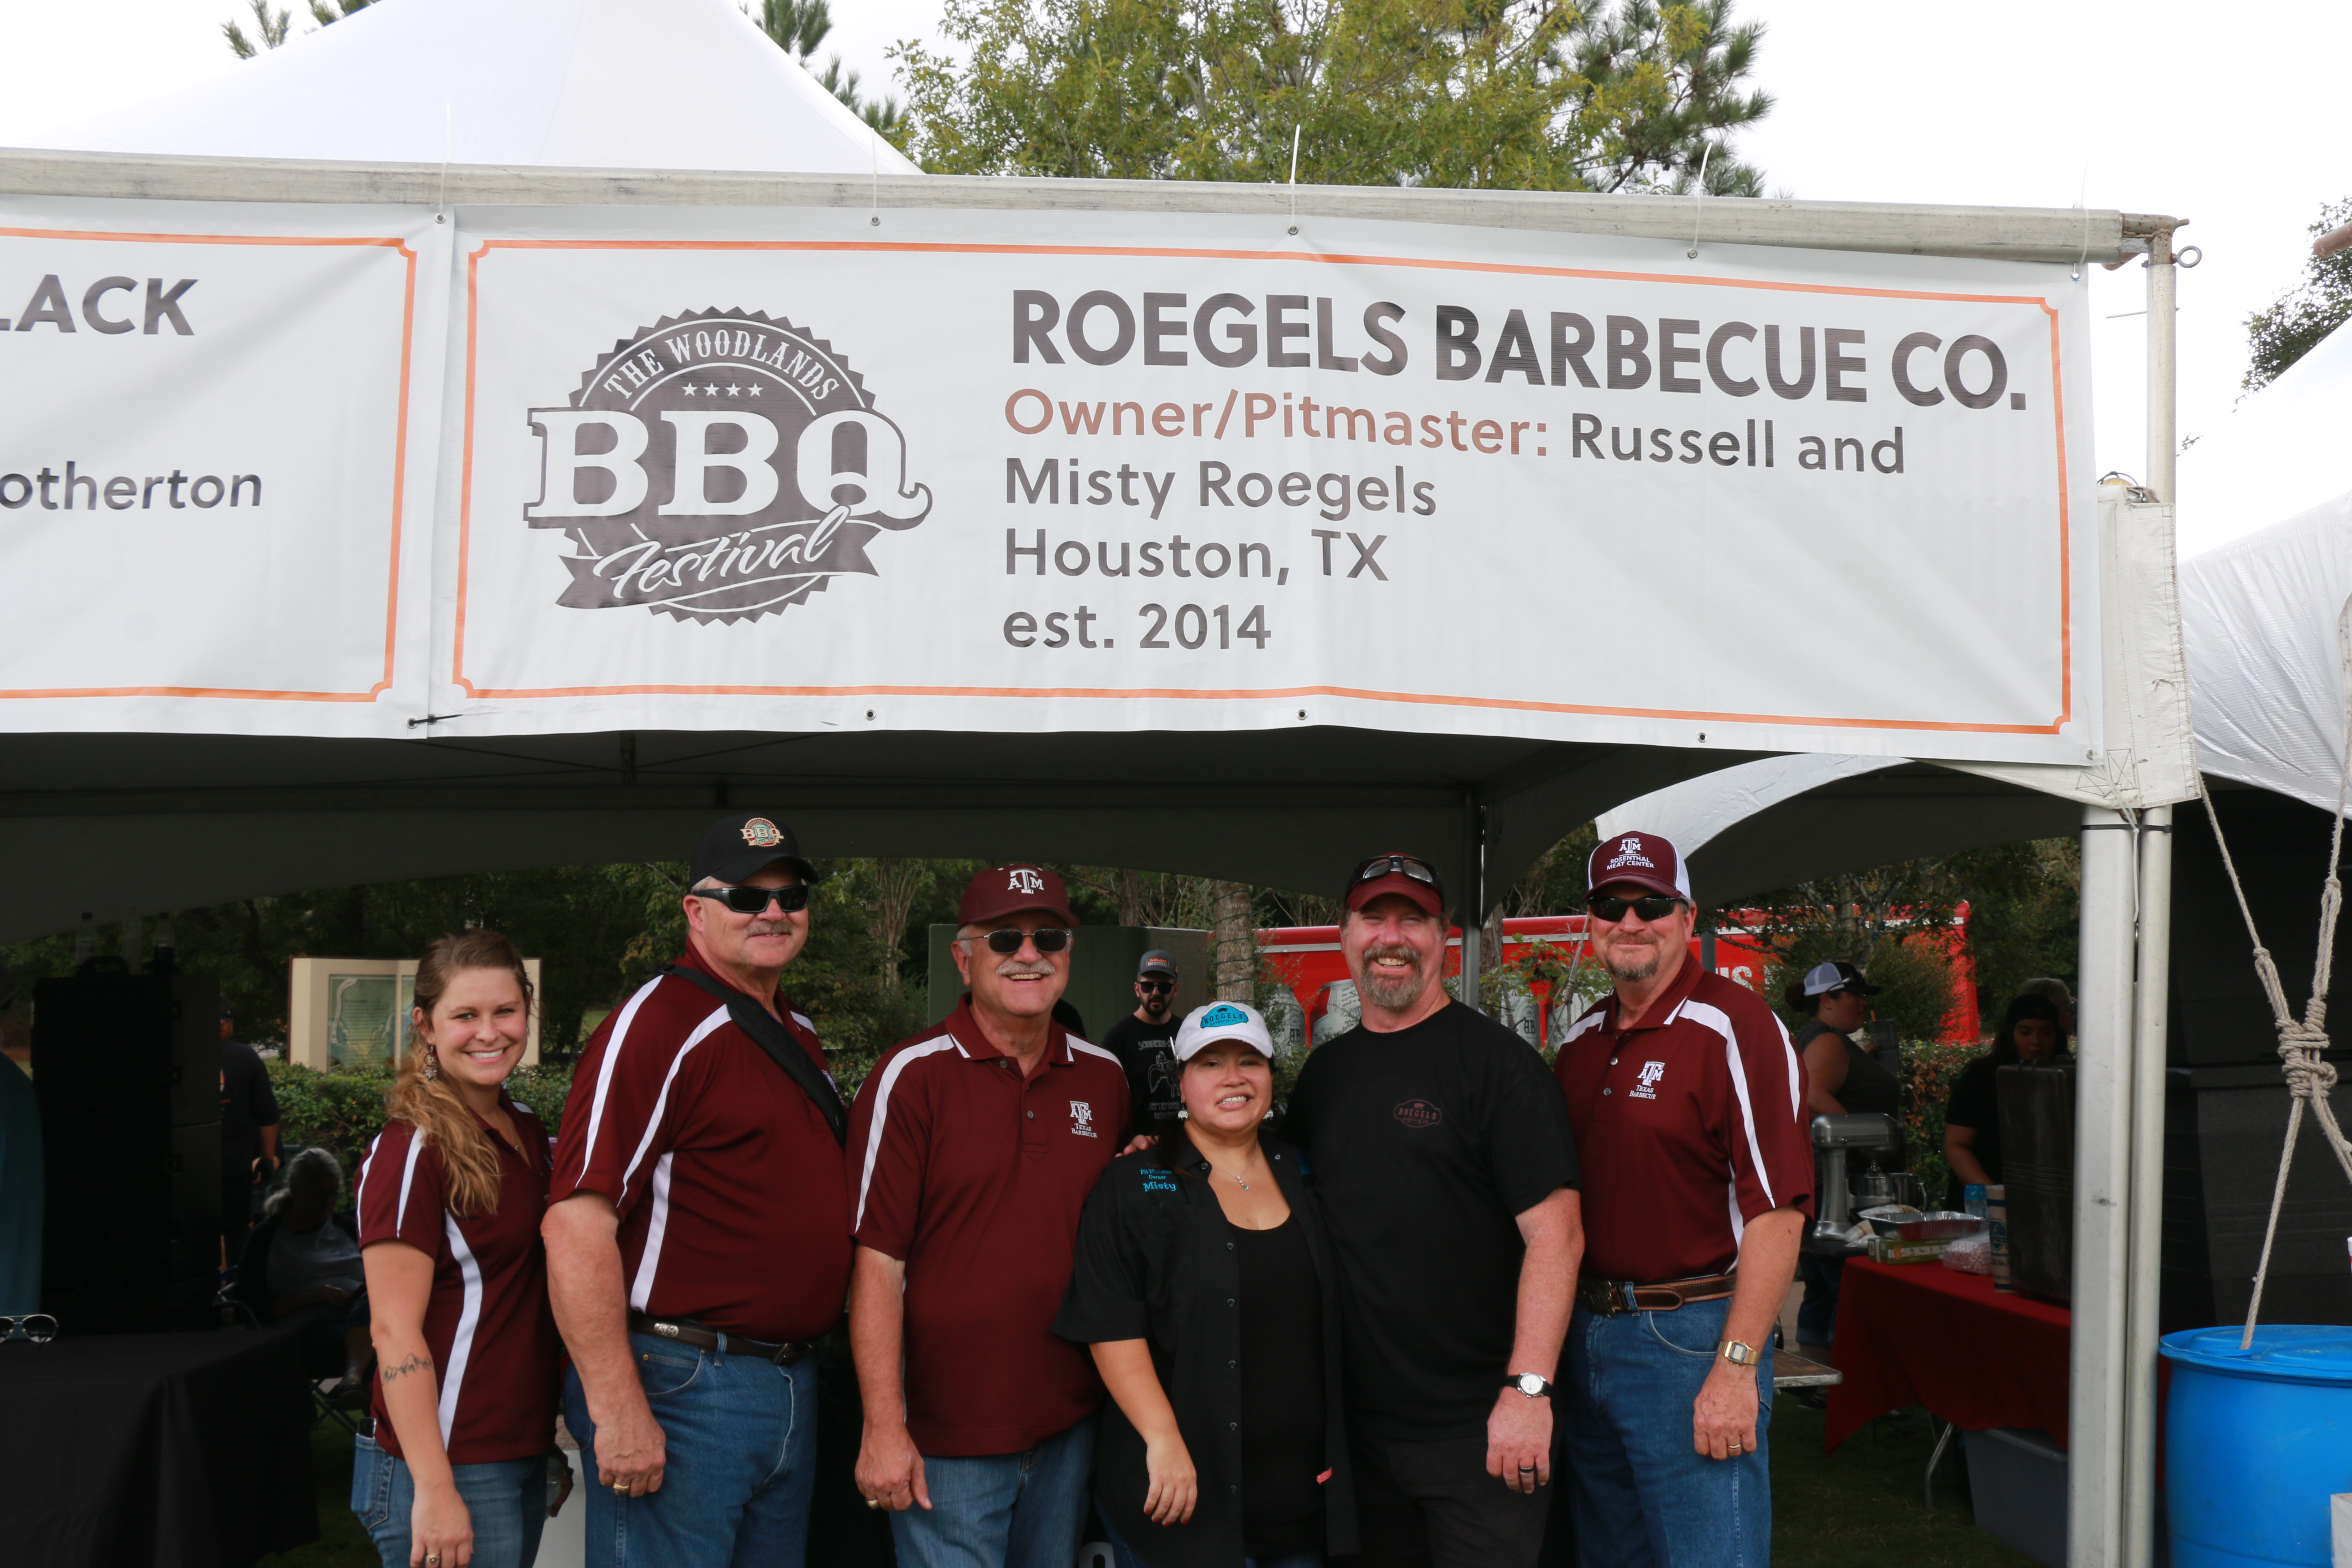 Brogan, Davey, Jeff, Misty Roegels, Russell Roegels, and Ray in front of the Roegels Barbecue booth at The Woodlands BBQ Festival